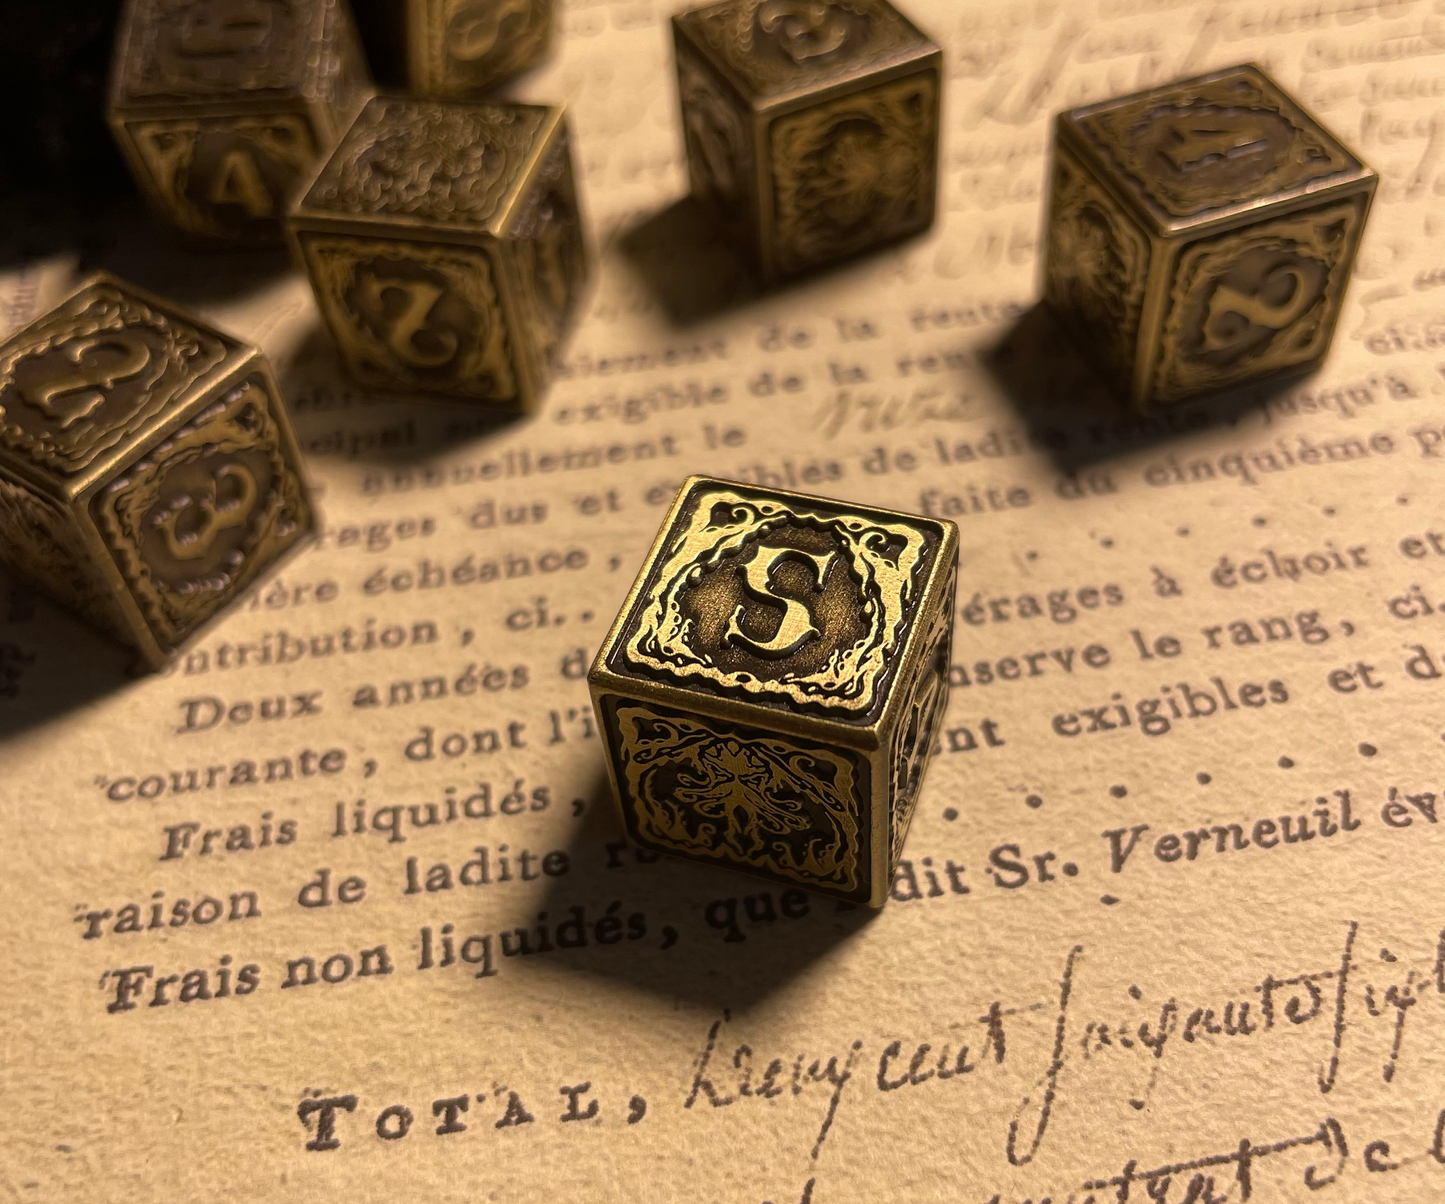 Shining Hexahedron Cthulhu D6 Metal Dice